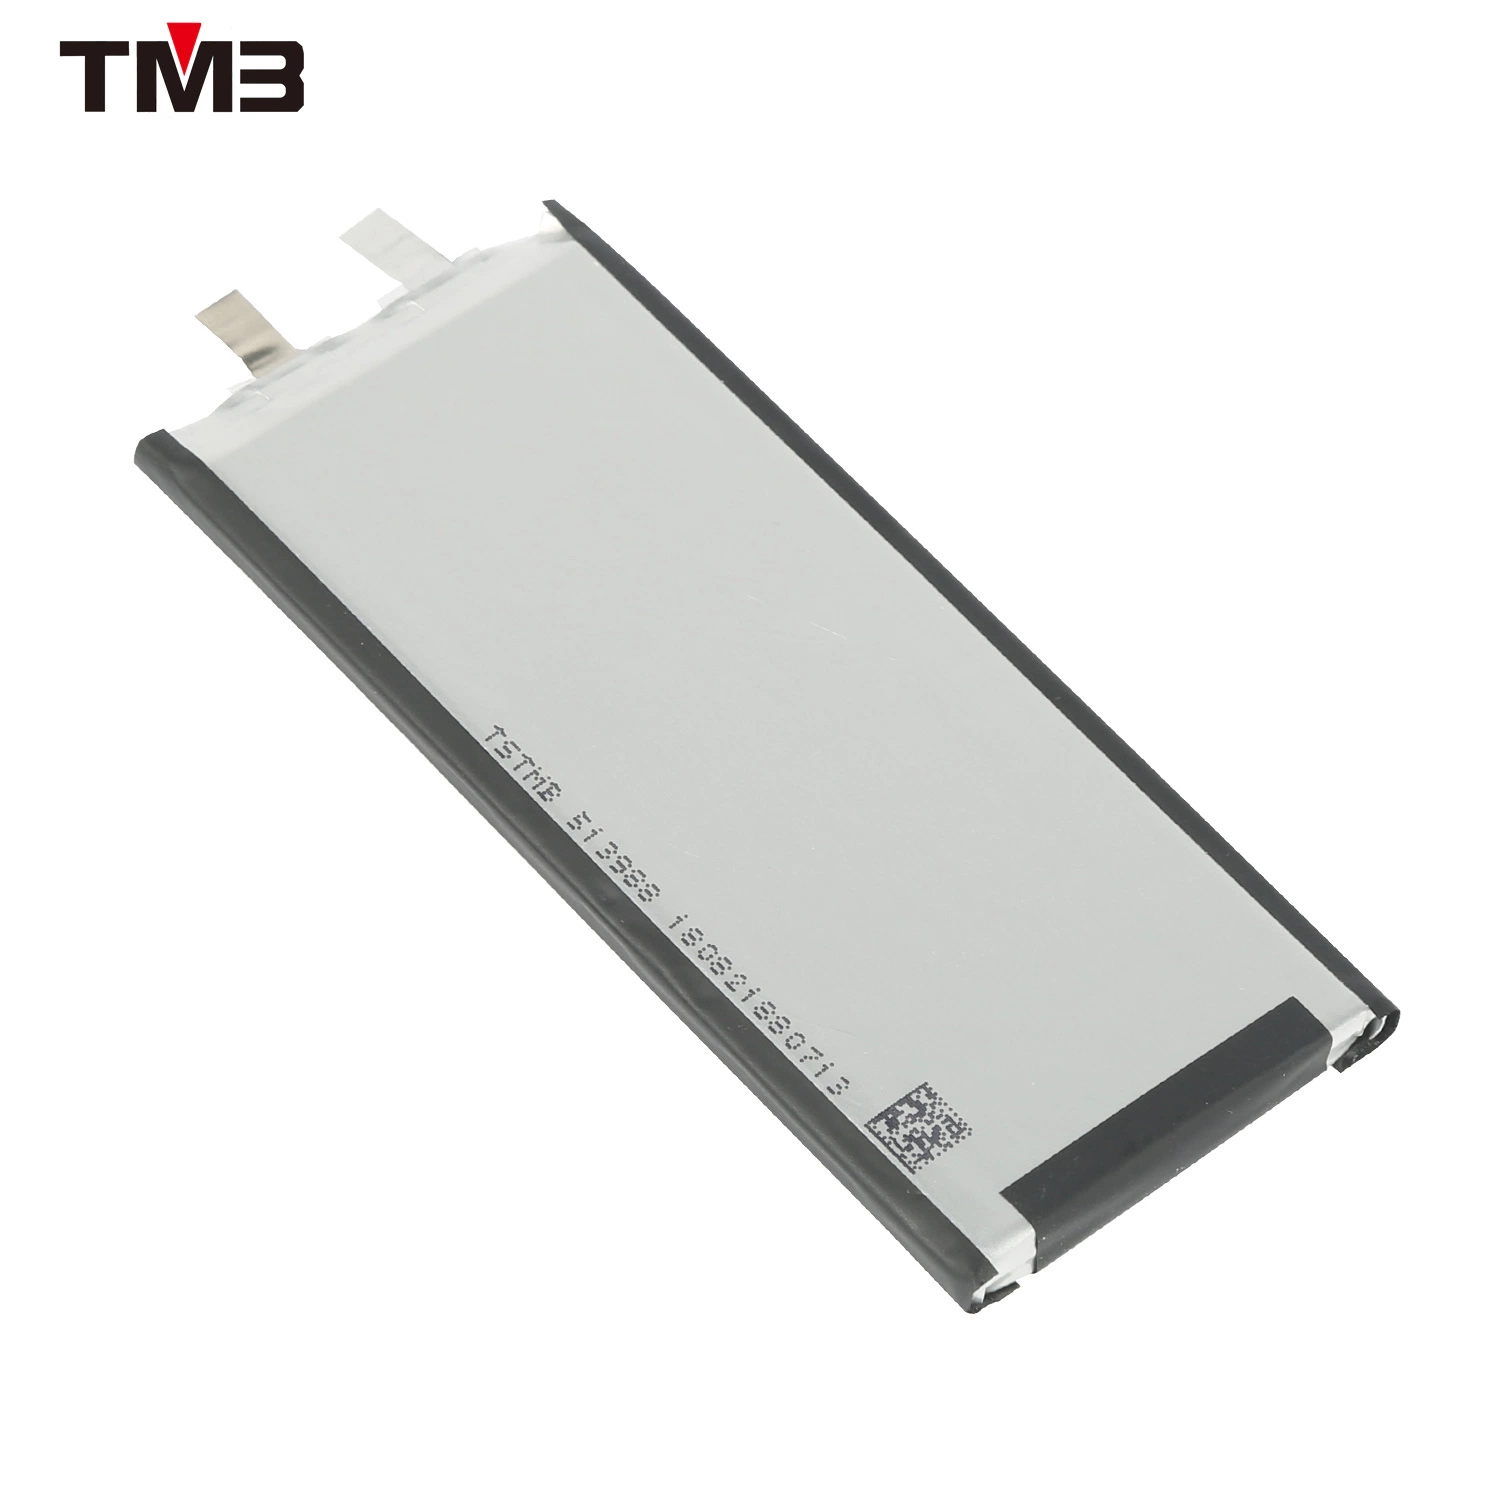 Polymer Li-ion Cell Lithium Ion Battery for Mobile Phone, Portable Printer